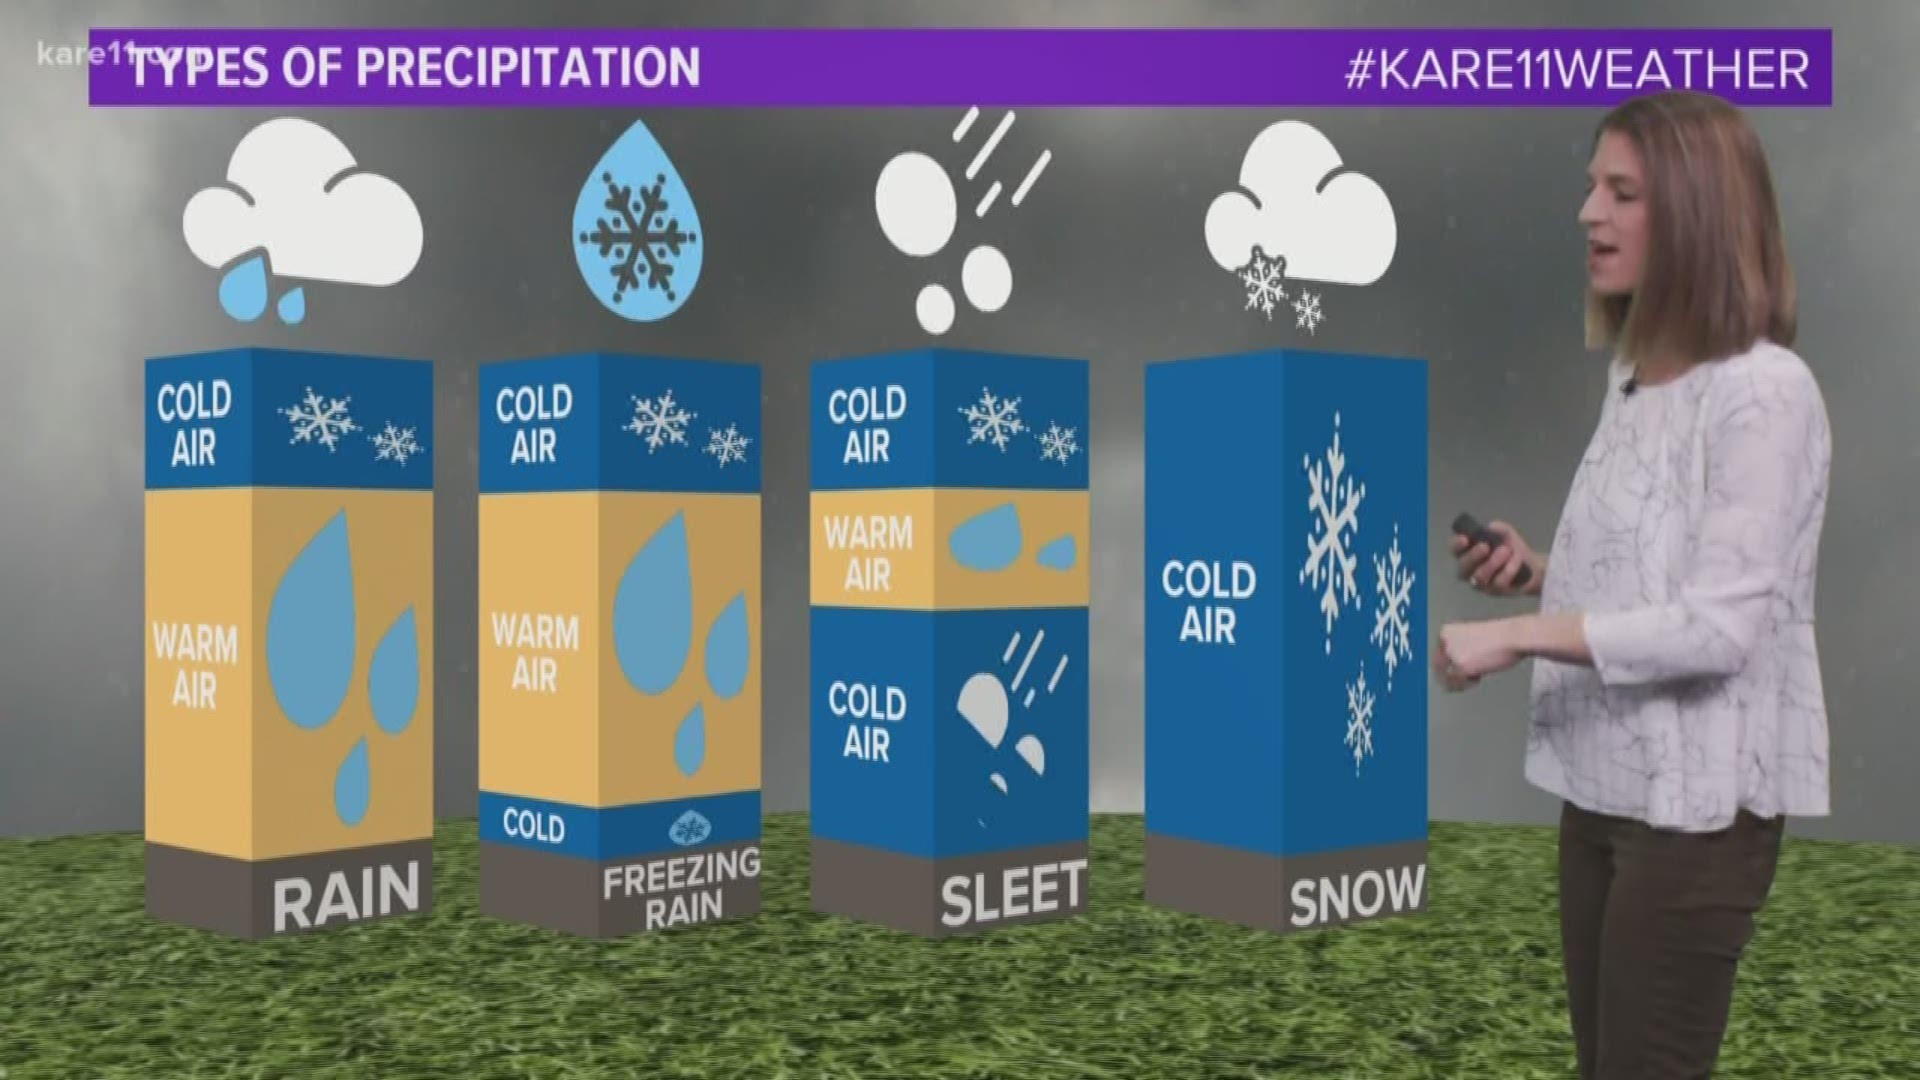 It's not just the temperatures at the ground, but what's happening above, that determines our precipitation type here at the surface. https://kare11.tv/2I99Qy0